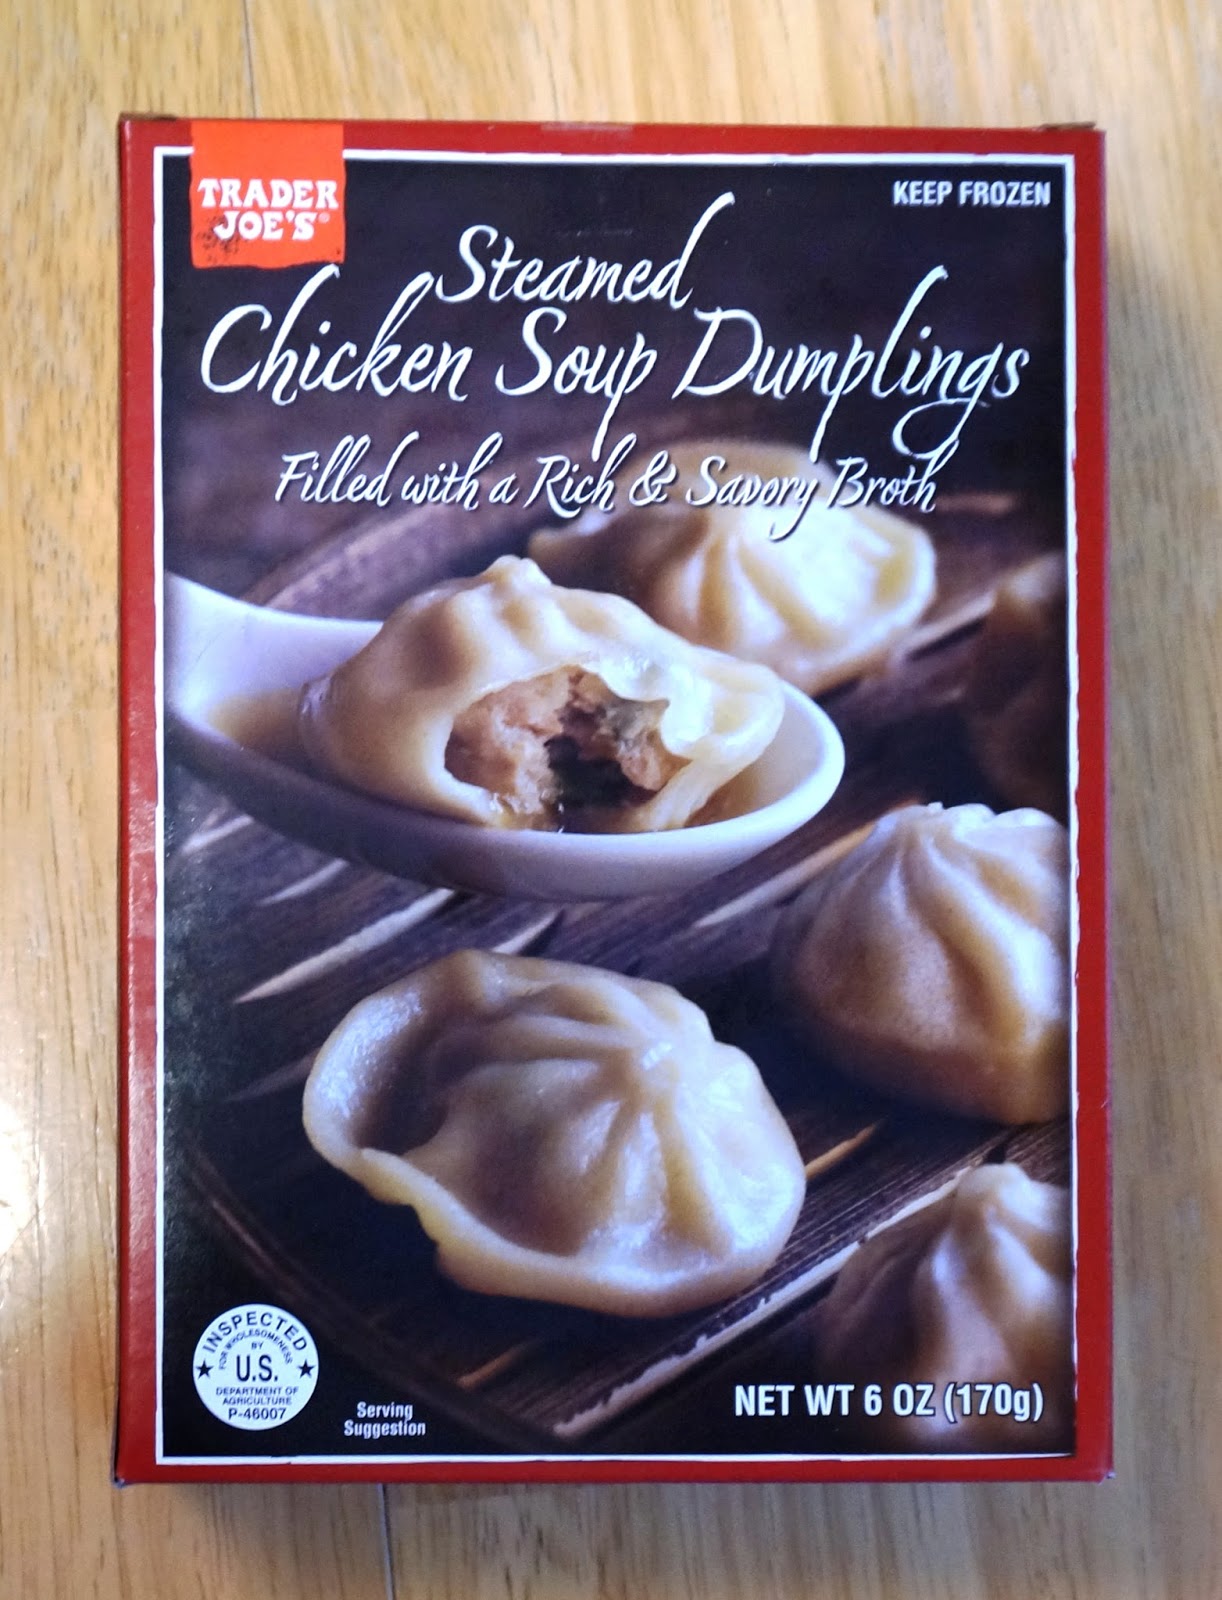  Trader Joe's Steamed Chicken Soup Dumplings (Pack of 8) -  Frozen White Chicken Meat Filled with a Rich and Savory Broth - Delicious  Frozen Meal & Entree and Ready Set